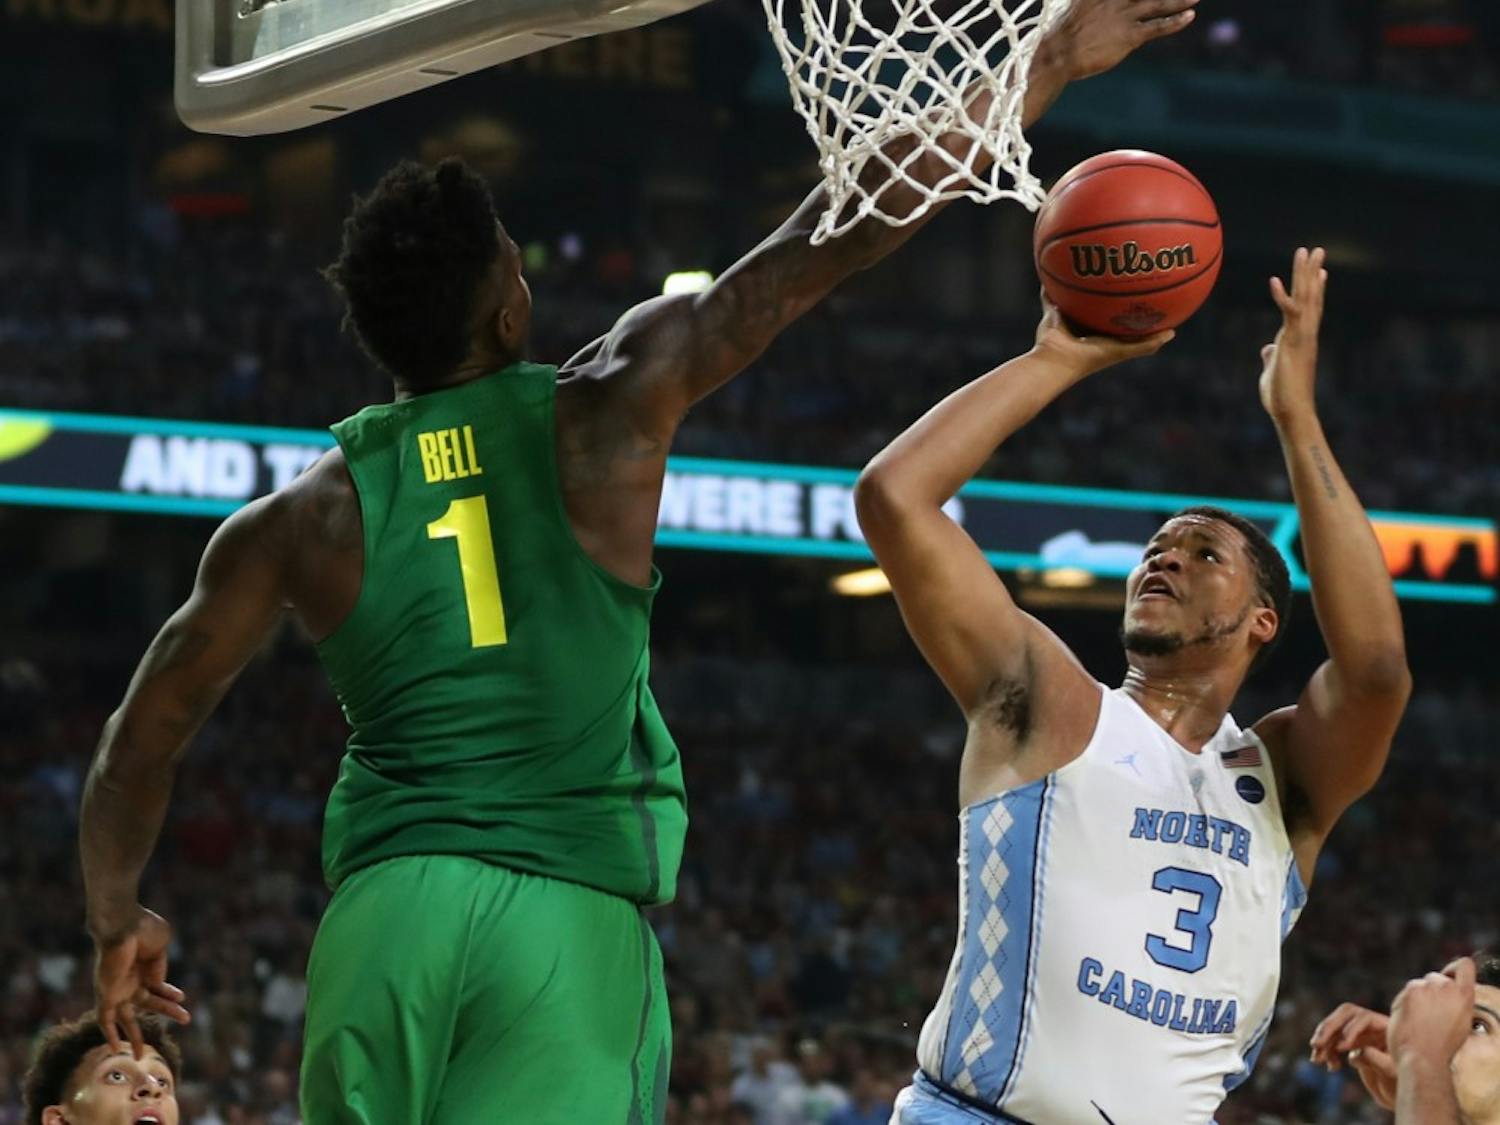 North Carolina forward Kennedy Meeks (3) shoots over Oregon forward Jordan Bell (1) in the teams' Final Four matchup on April 1 in Phoenix.